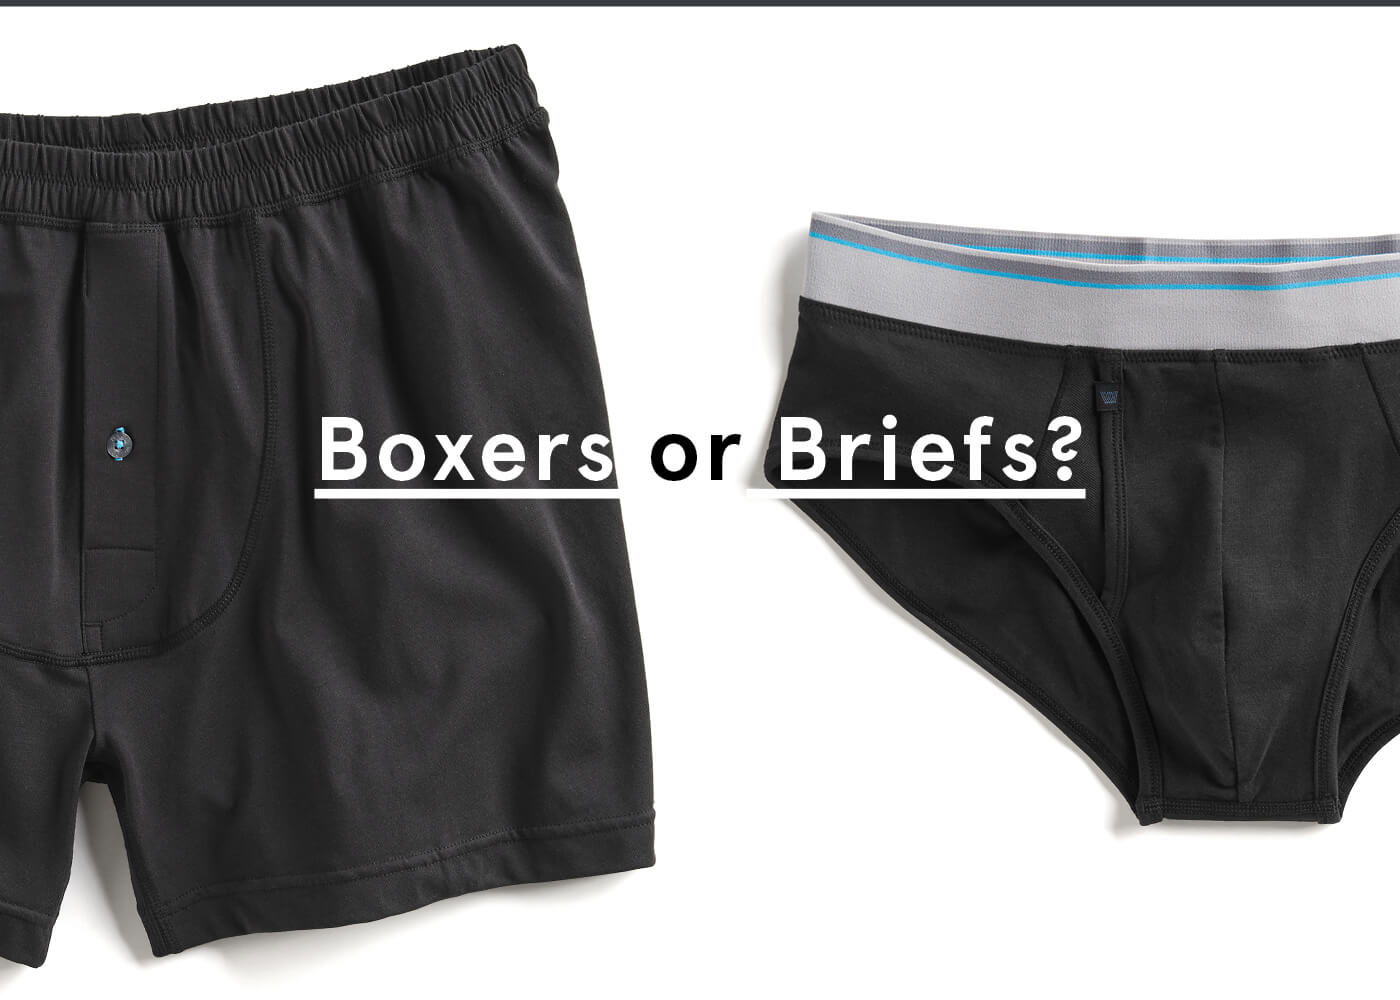 Boxers or briefs? How do I choose between the two? | Stitch Fix Men